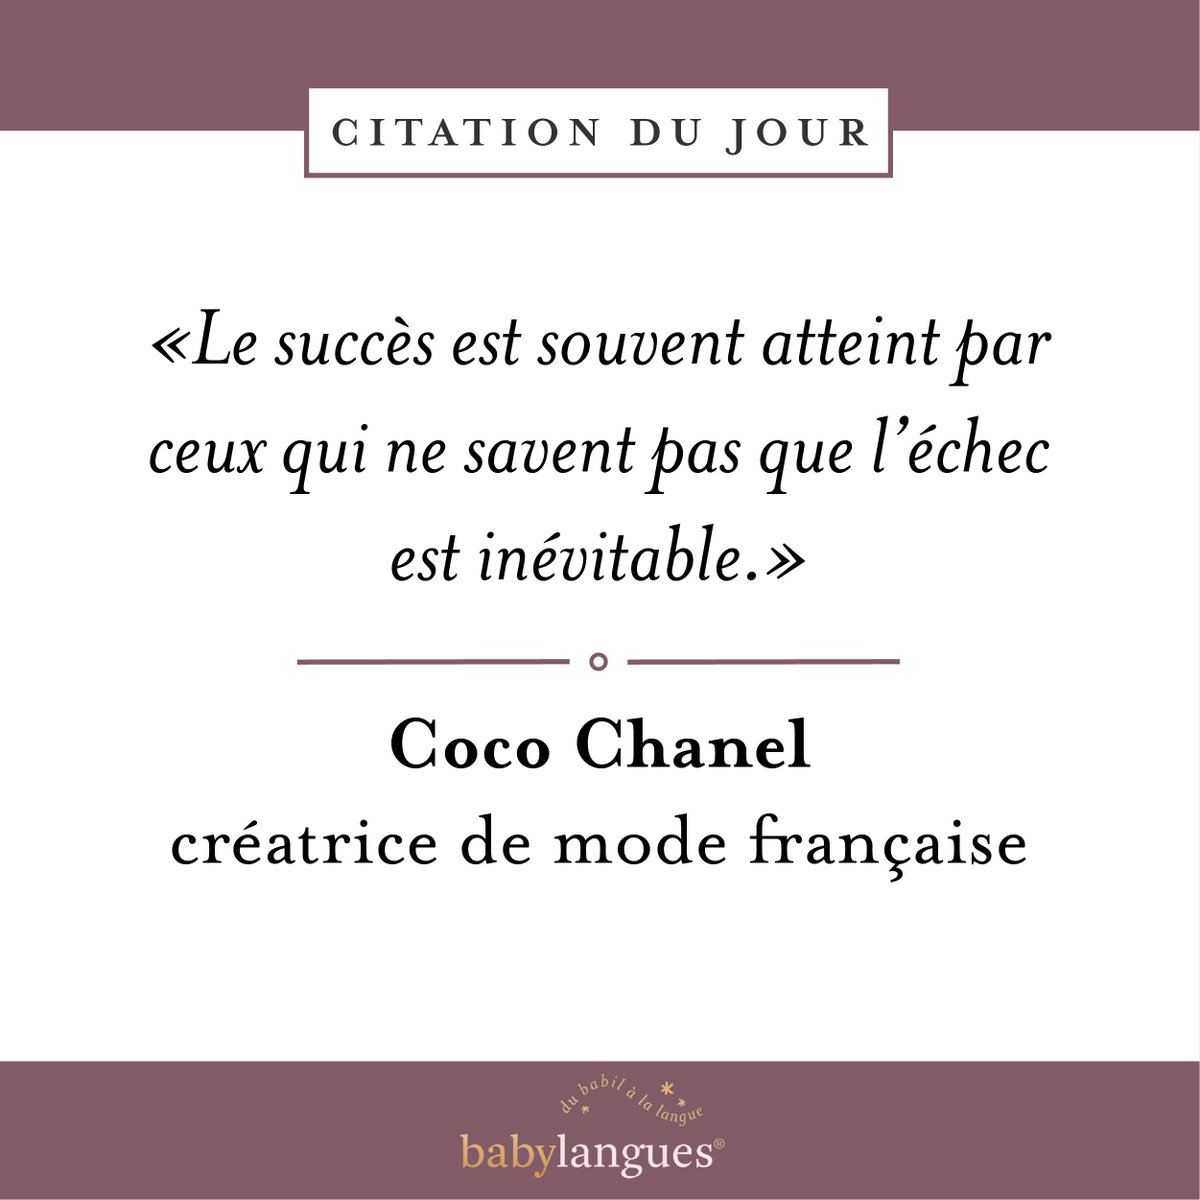 Babylangues Jobs on Twitter: "We love this timeless quote from Coco Chanel! "Beauty the moment you decide to be yourself." Want to discover more about French culture? 🇫🇷 to